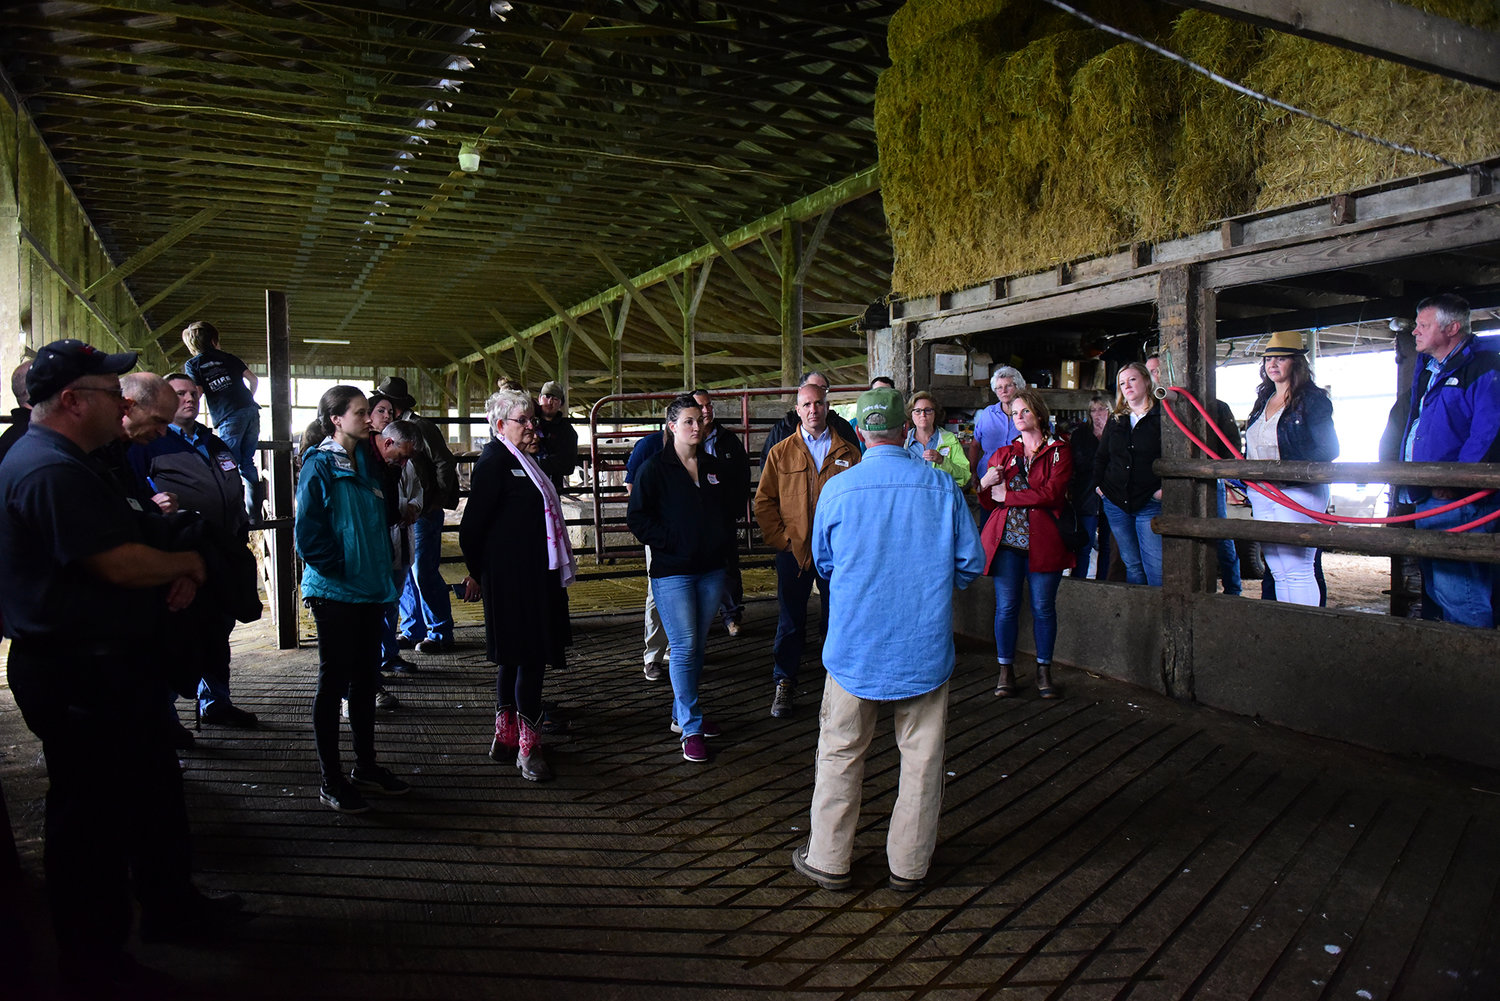 Ross McMahan, owner of the Cowlitz Meadows Dairy, talks to regional leaders about his operation and the challenges he faces during the Lewis County Farm Bureau Tour of Ag Wednesday afternoon.